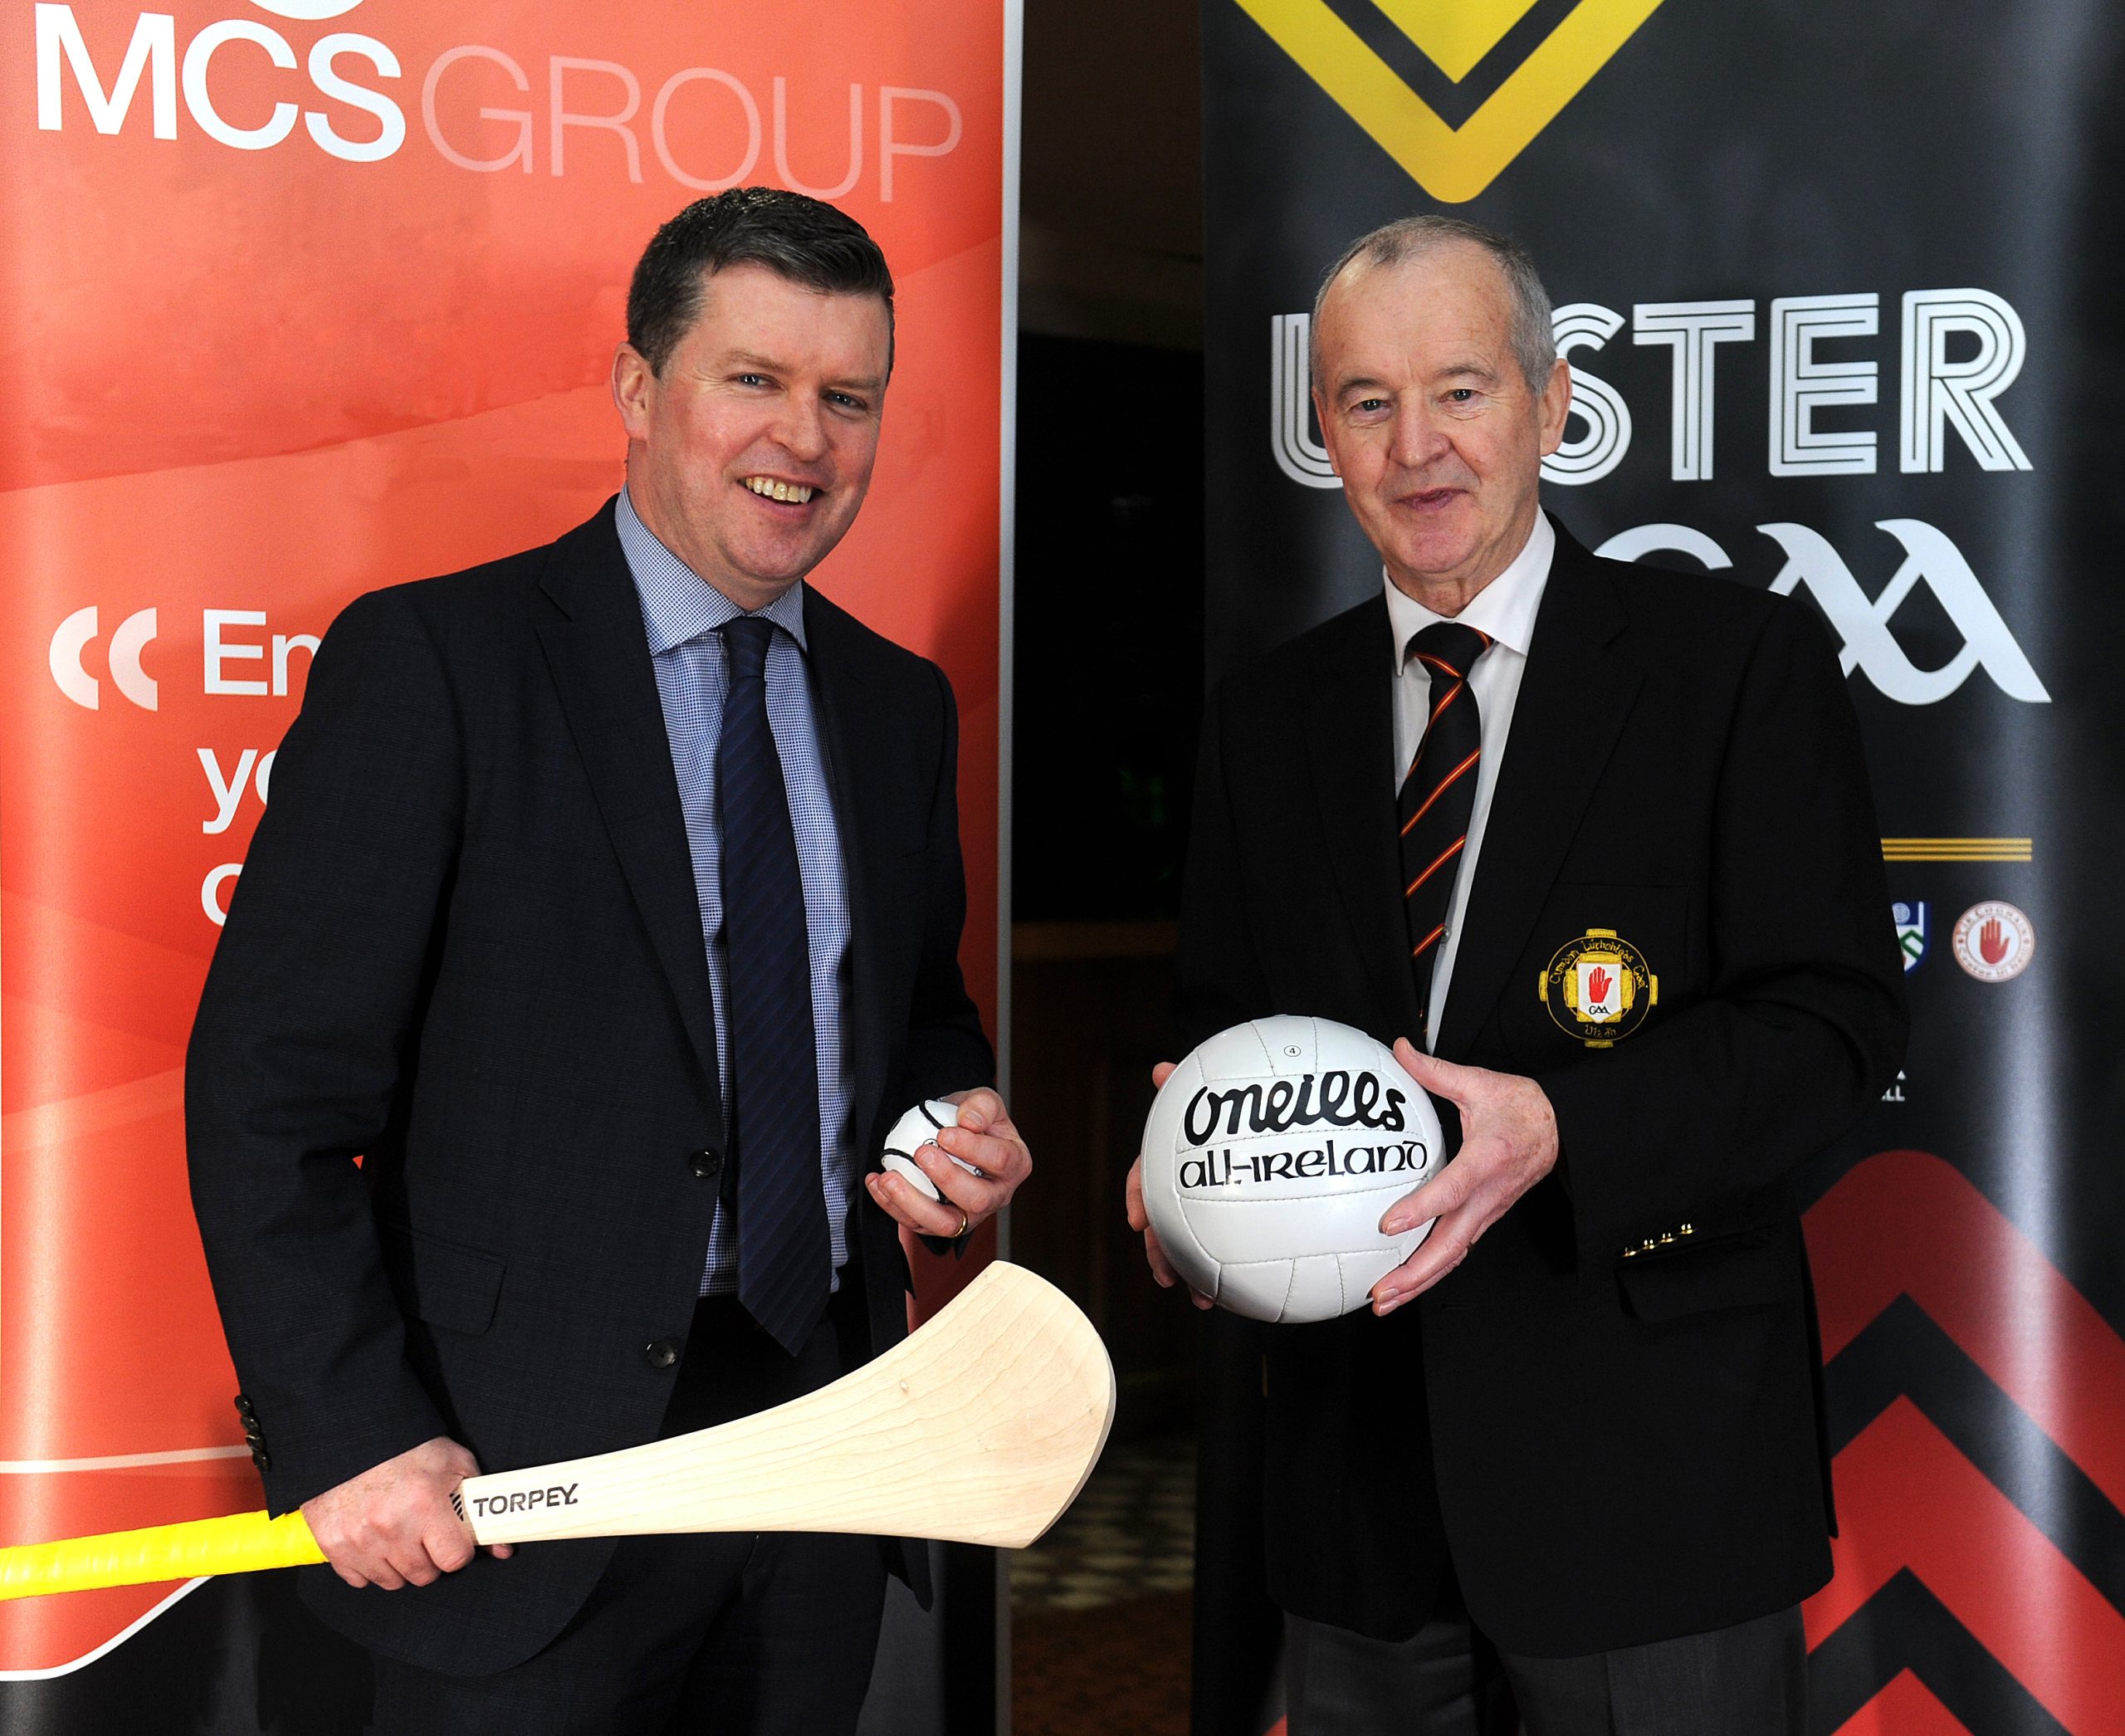 Ulster GAA confirm MCS Group as a Corporate Partner